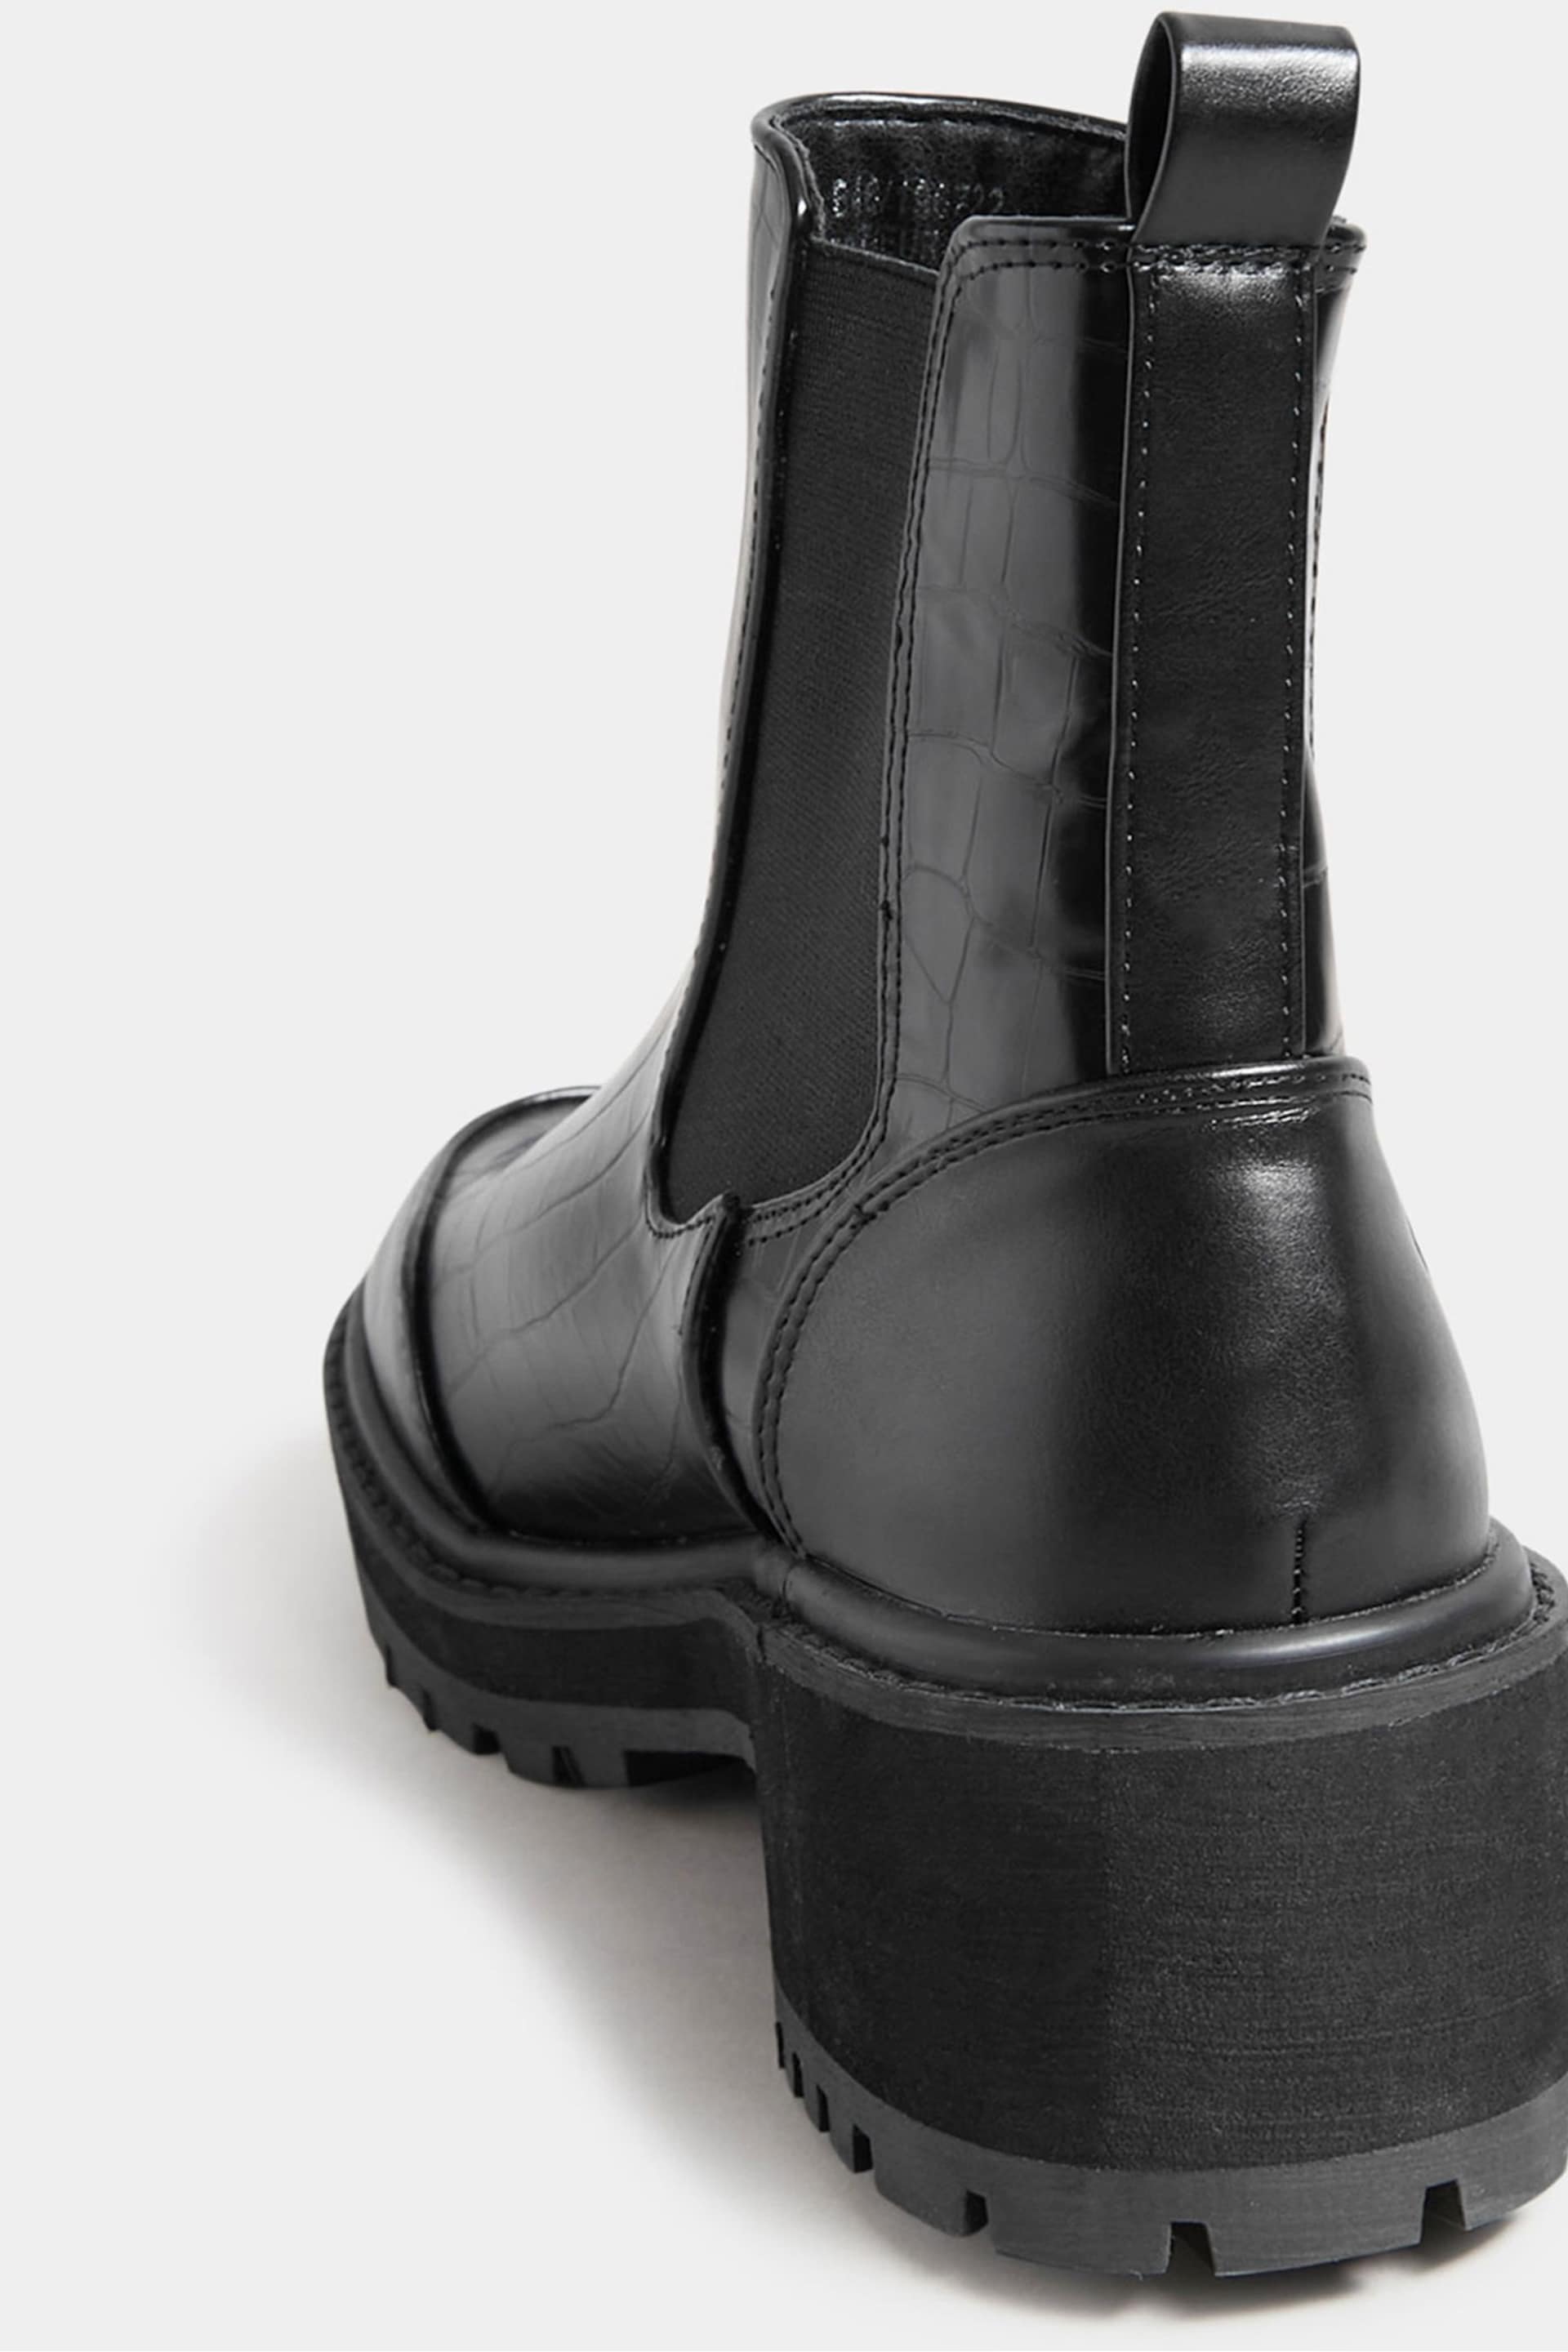 Long Tall Sally Black Chunky Chelsea Croc Effect Boots - Image 3 of 3